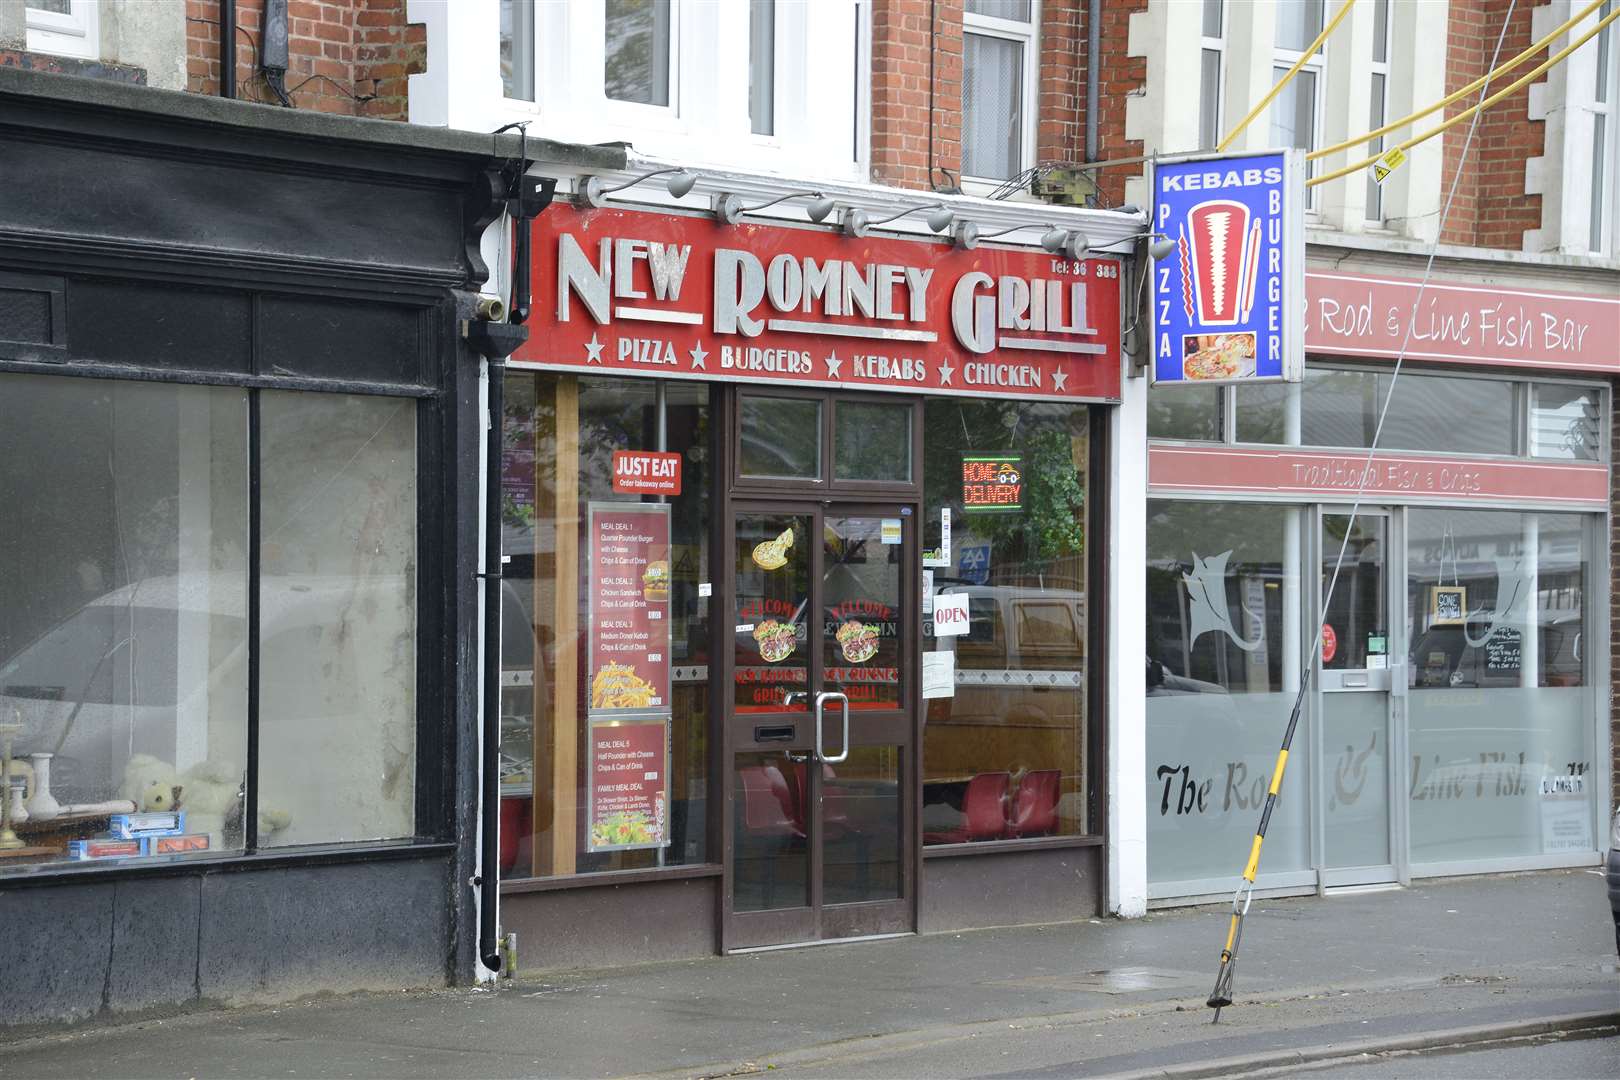 New Romney Grill in Littlestone Road where the attack happened